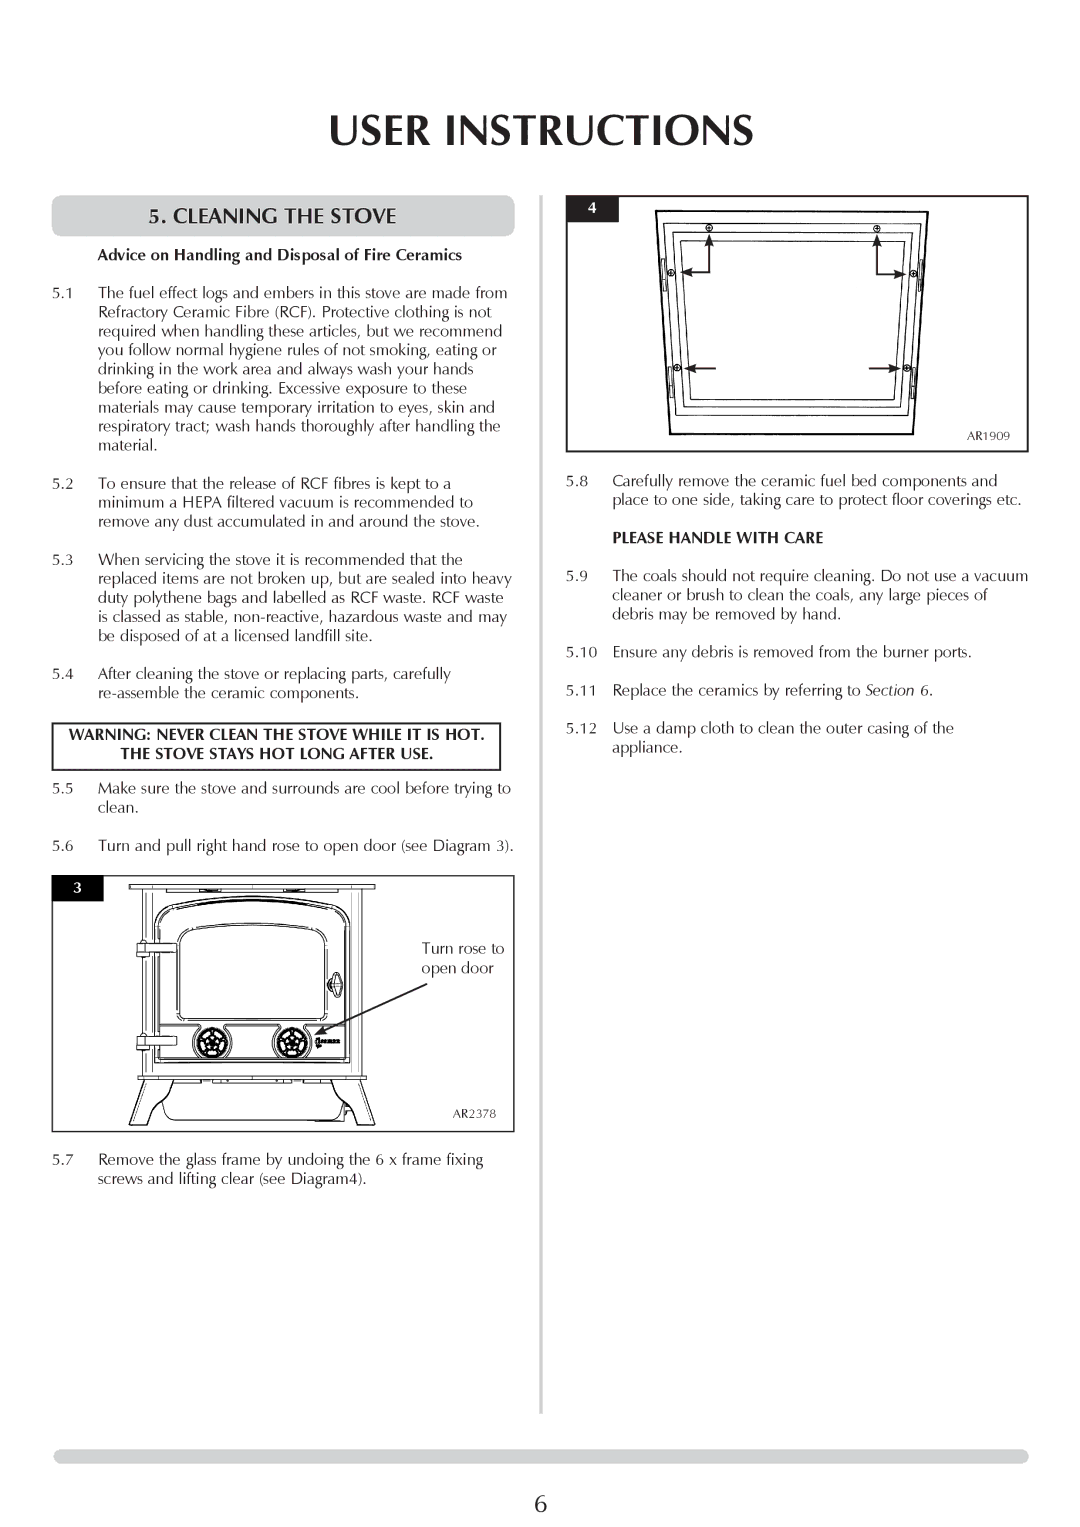 Yeoman PR1145 instruction manual Cleaning the stove, Advice on Handling and Disposal of Fire Ceramics 